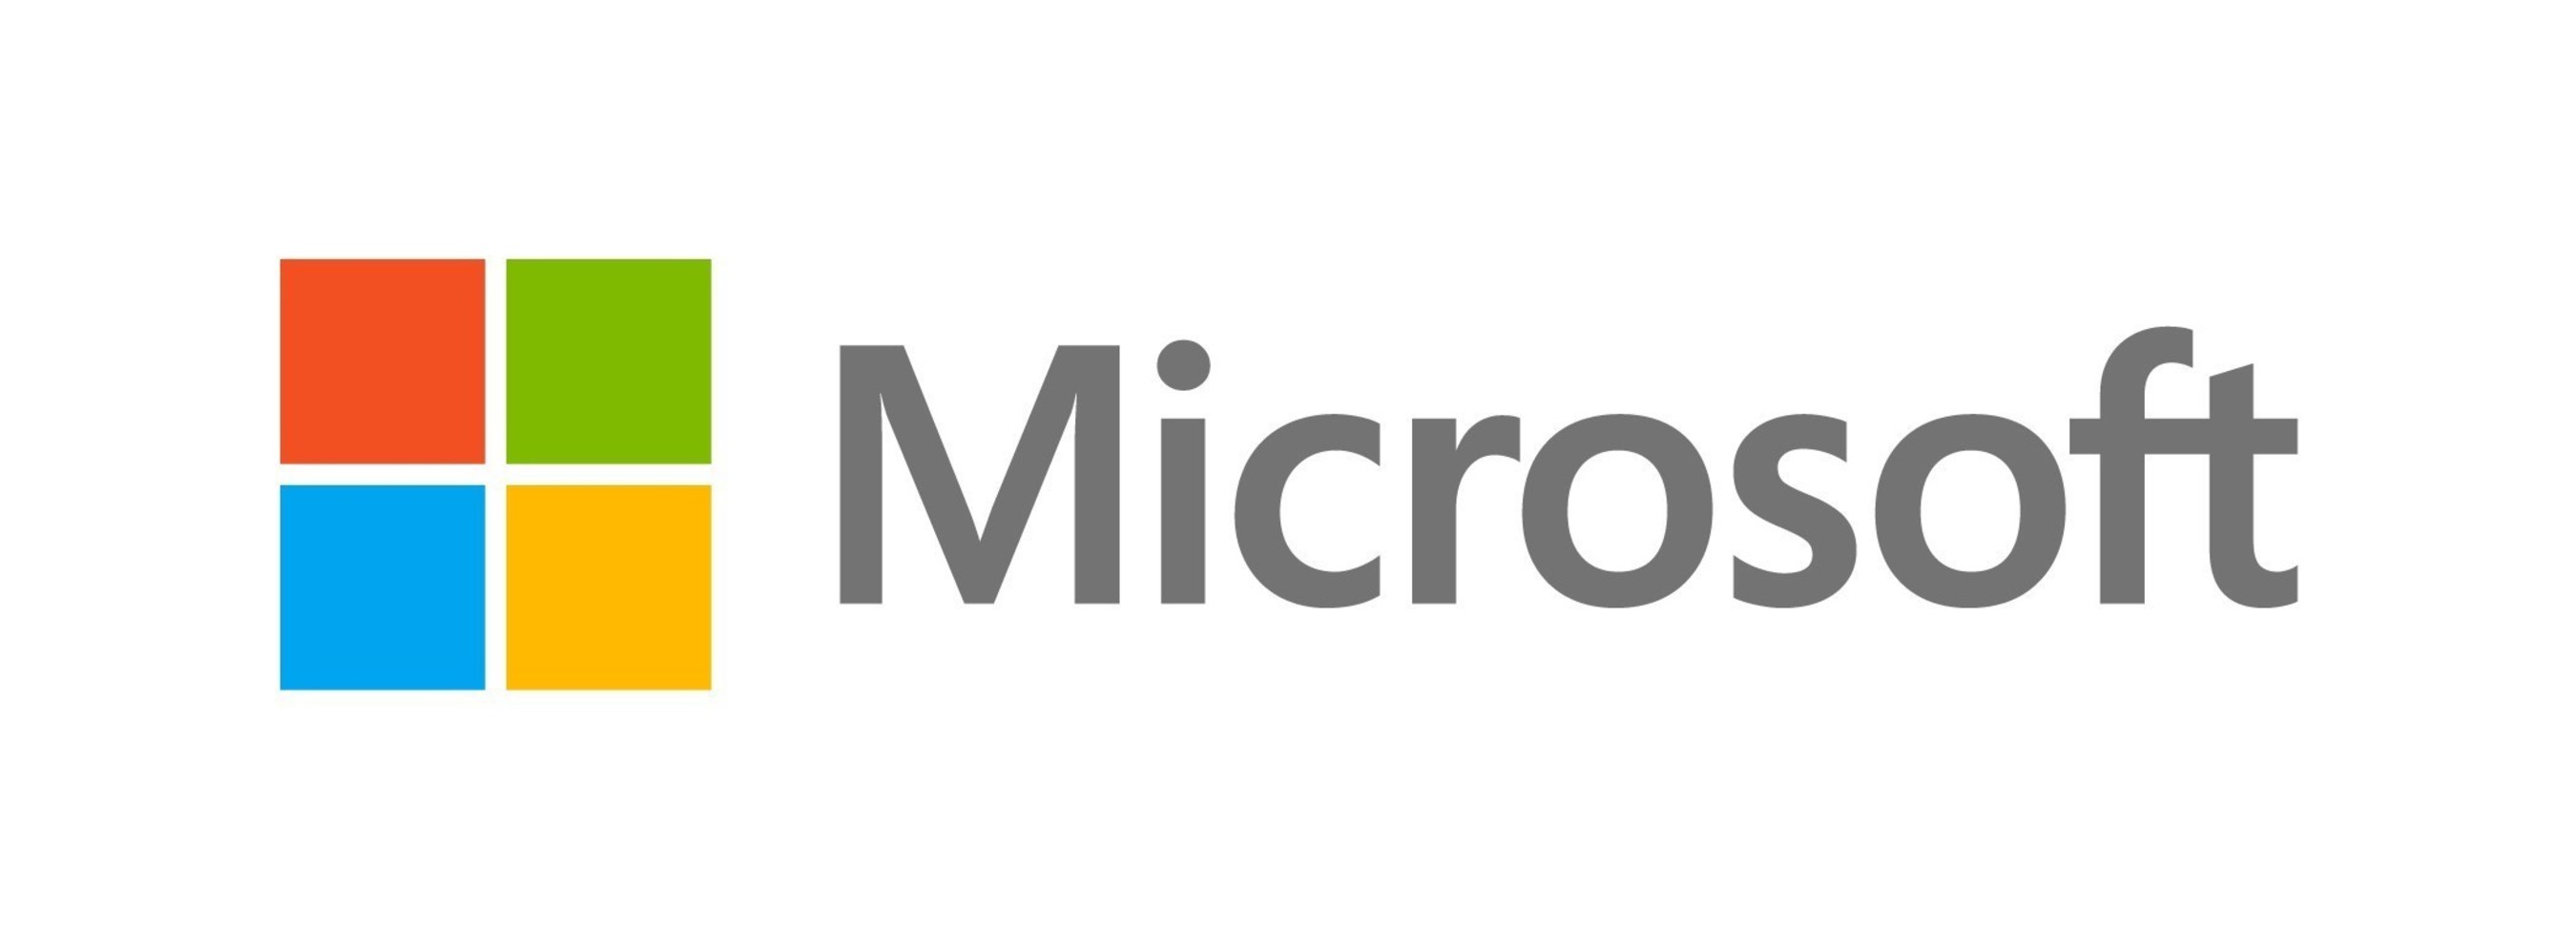 TASER International and Microsoft Corp. Announce Partnership to Deliver a Trusted Cloud Platform for Law Enforcement